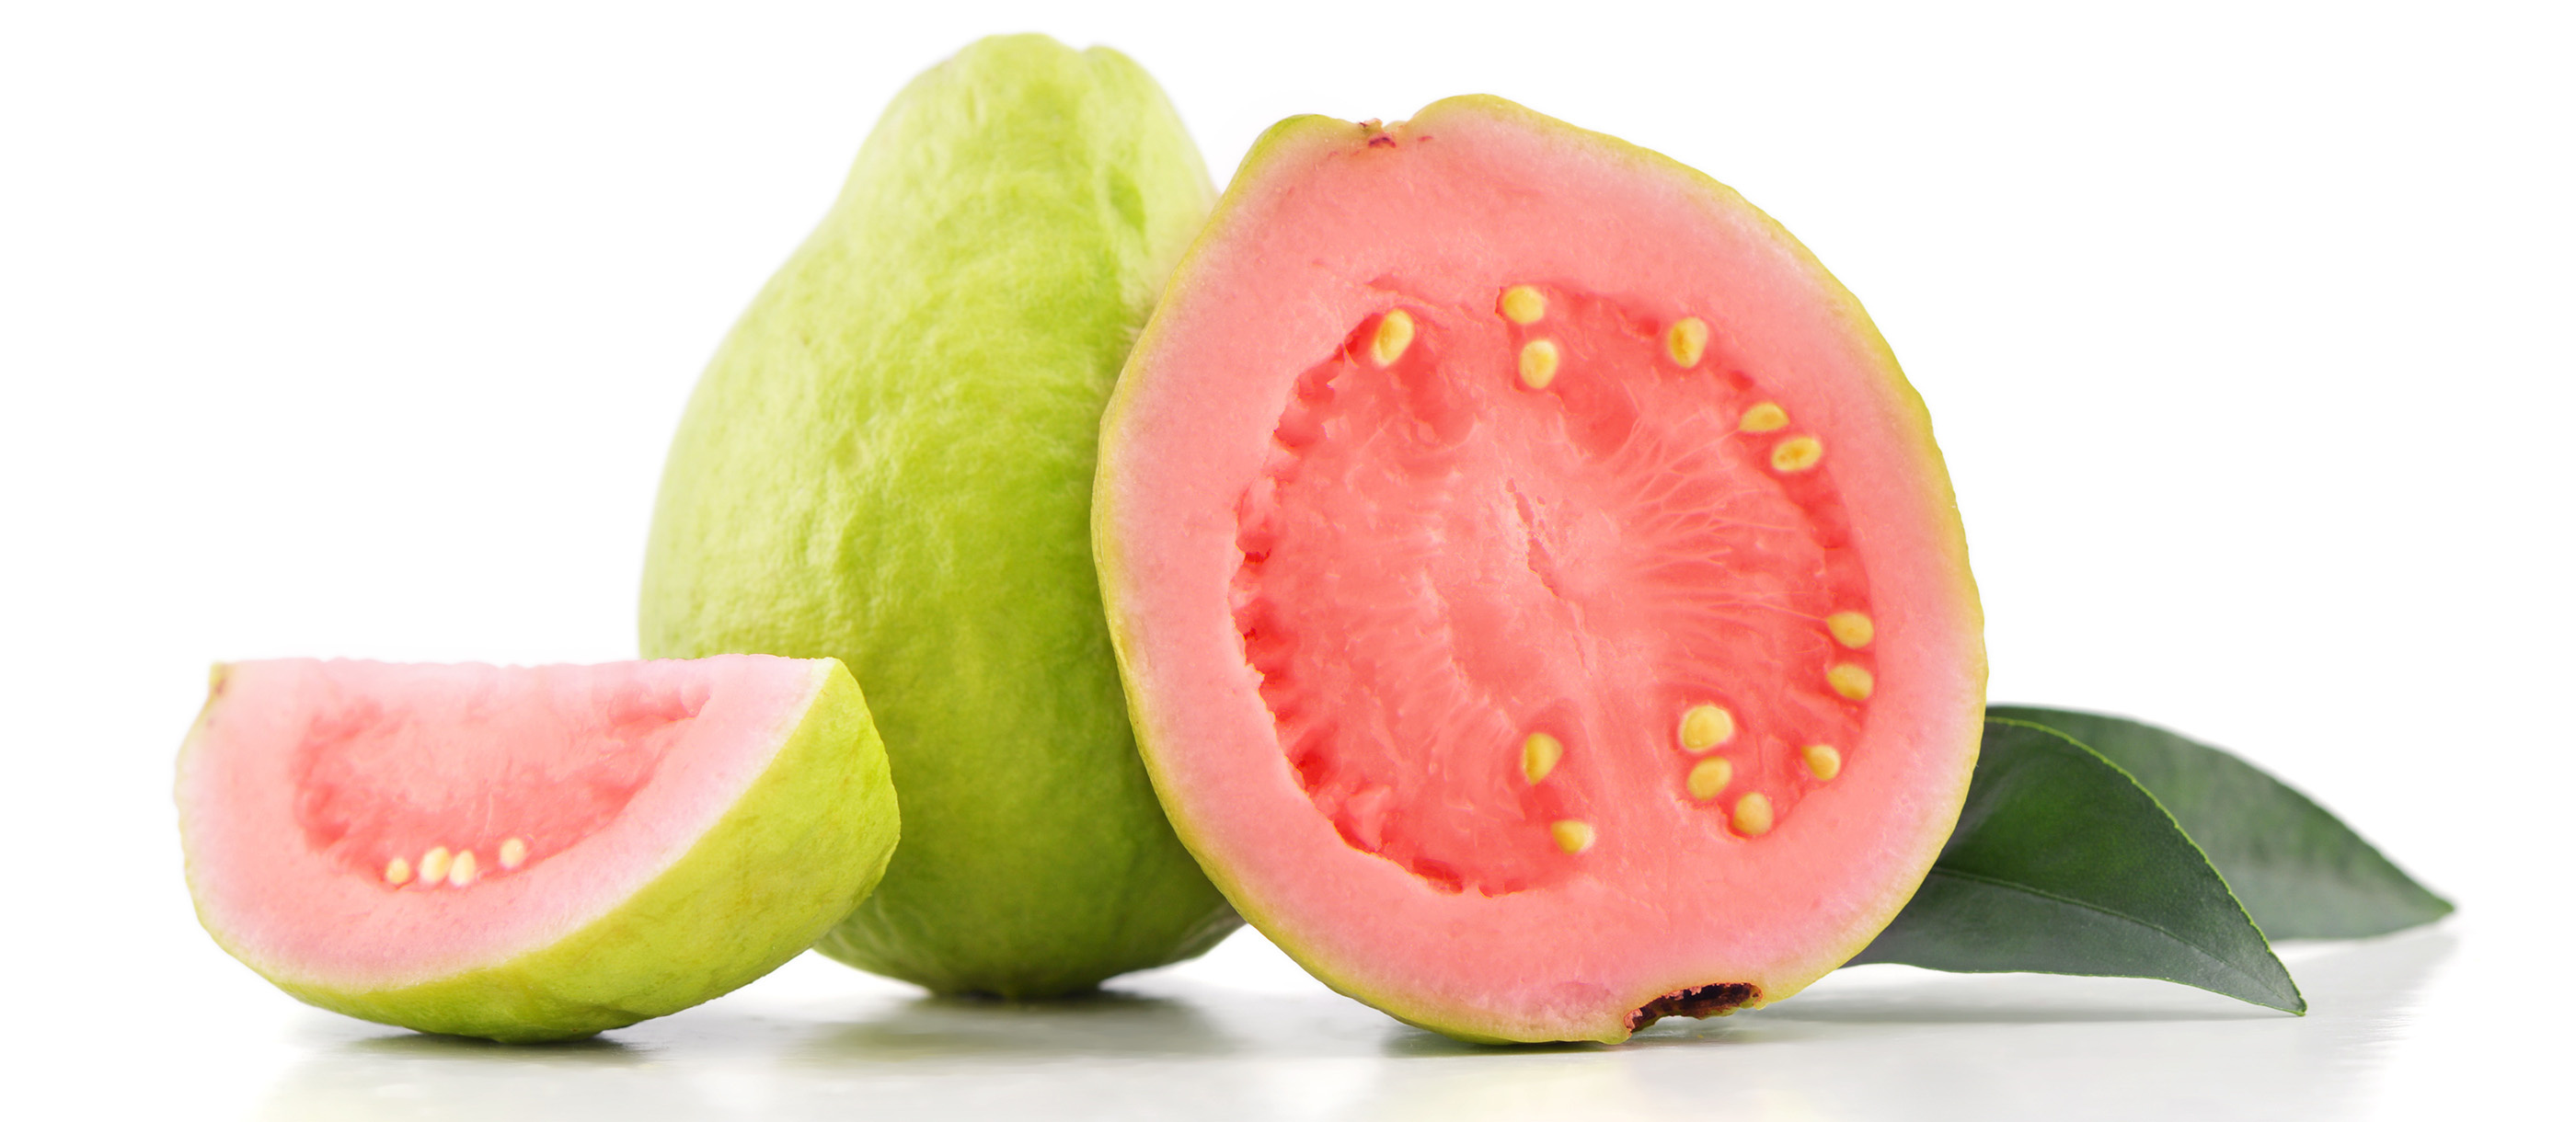 Guava: A common tropical fruit cultivated in many tropical and subtropical regions. 2800x1220 Dual Screen Wallpaper.